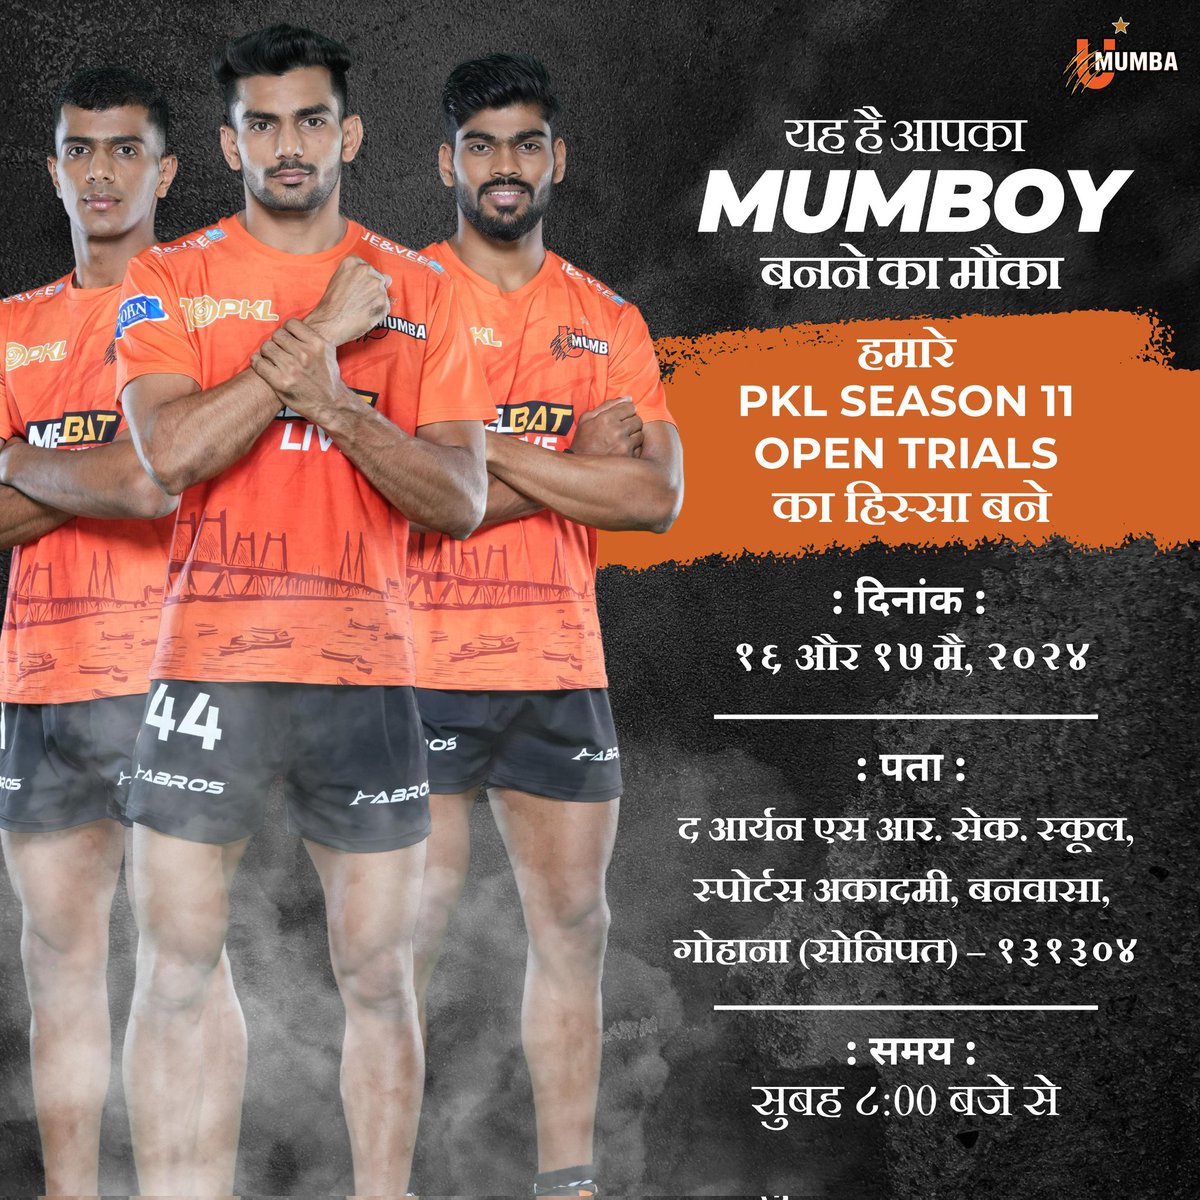 🔊Calling out the Kabaddi Talent across the country! 
It’s your chance to be part of U Mumba Squad for PKL Season 11💫. 
Find the details for the open trials. 
See you soon! 🤝

#UMumba | #आमचीMumba

@suhailchandhok l @RonnieScrewvala l @ProKabaddi